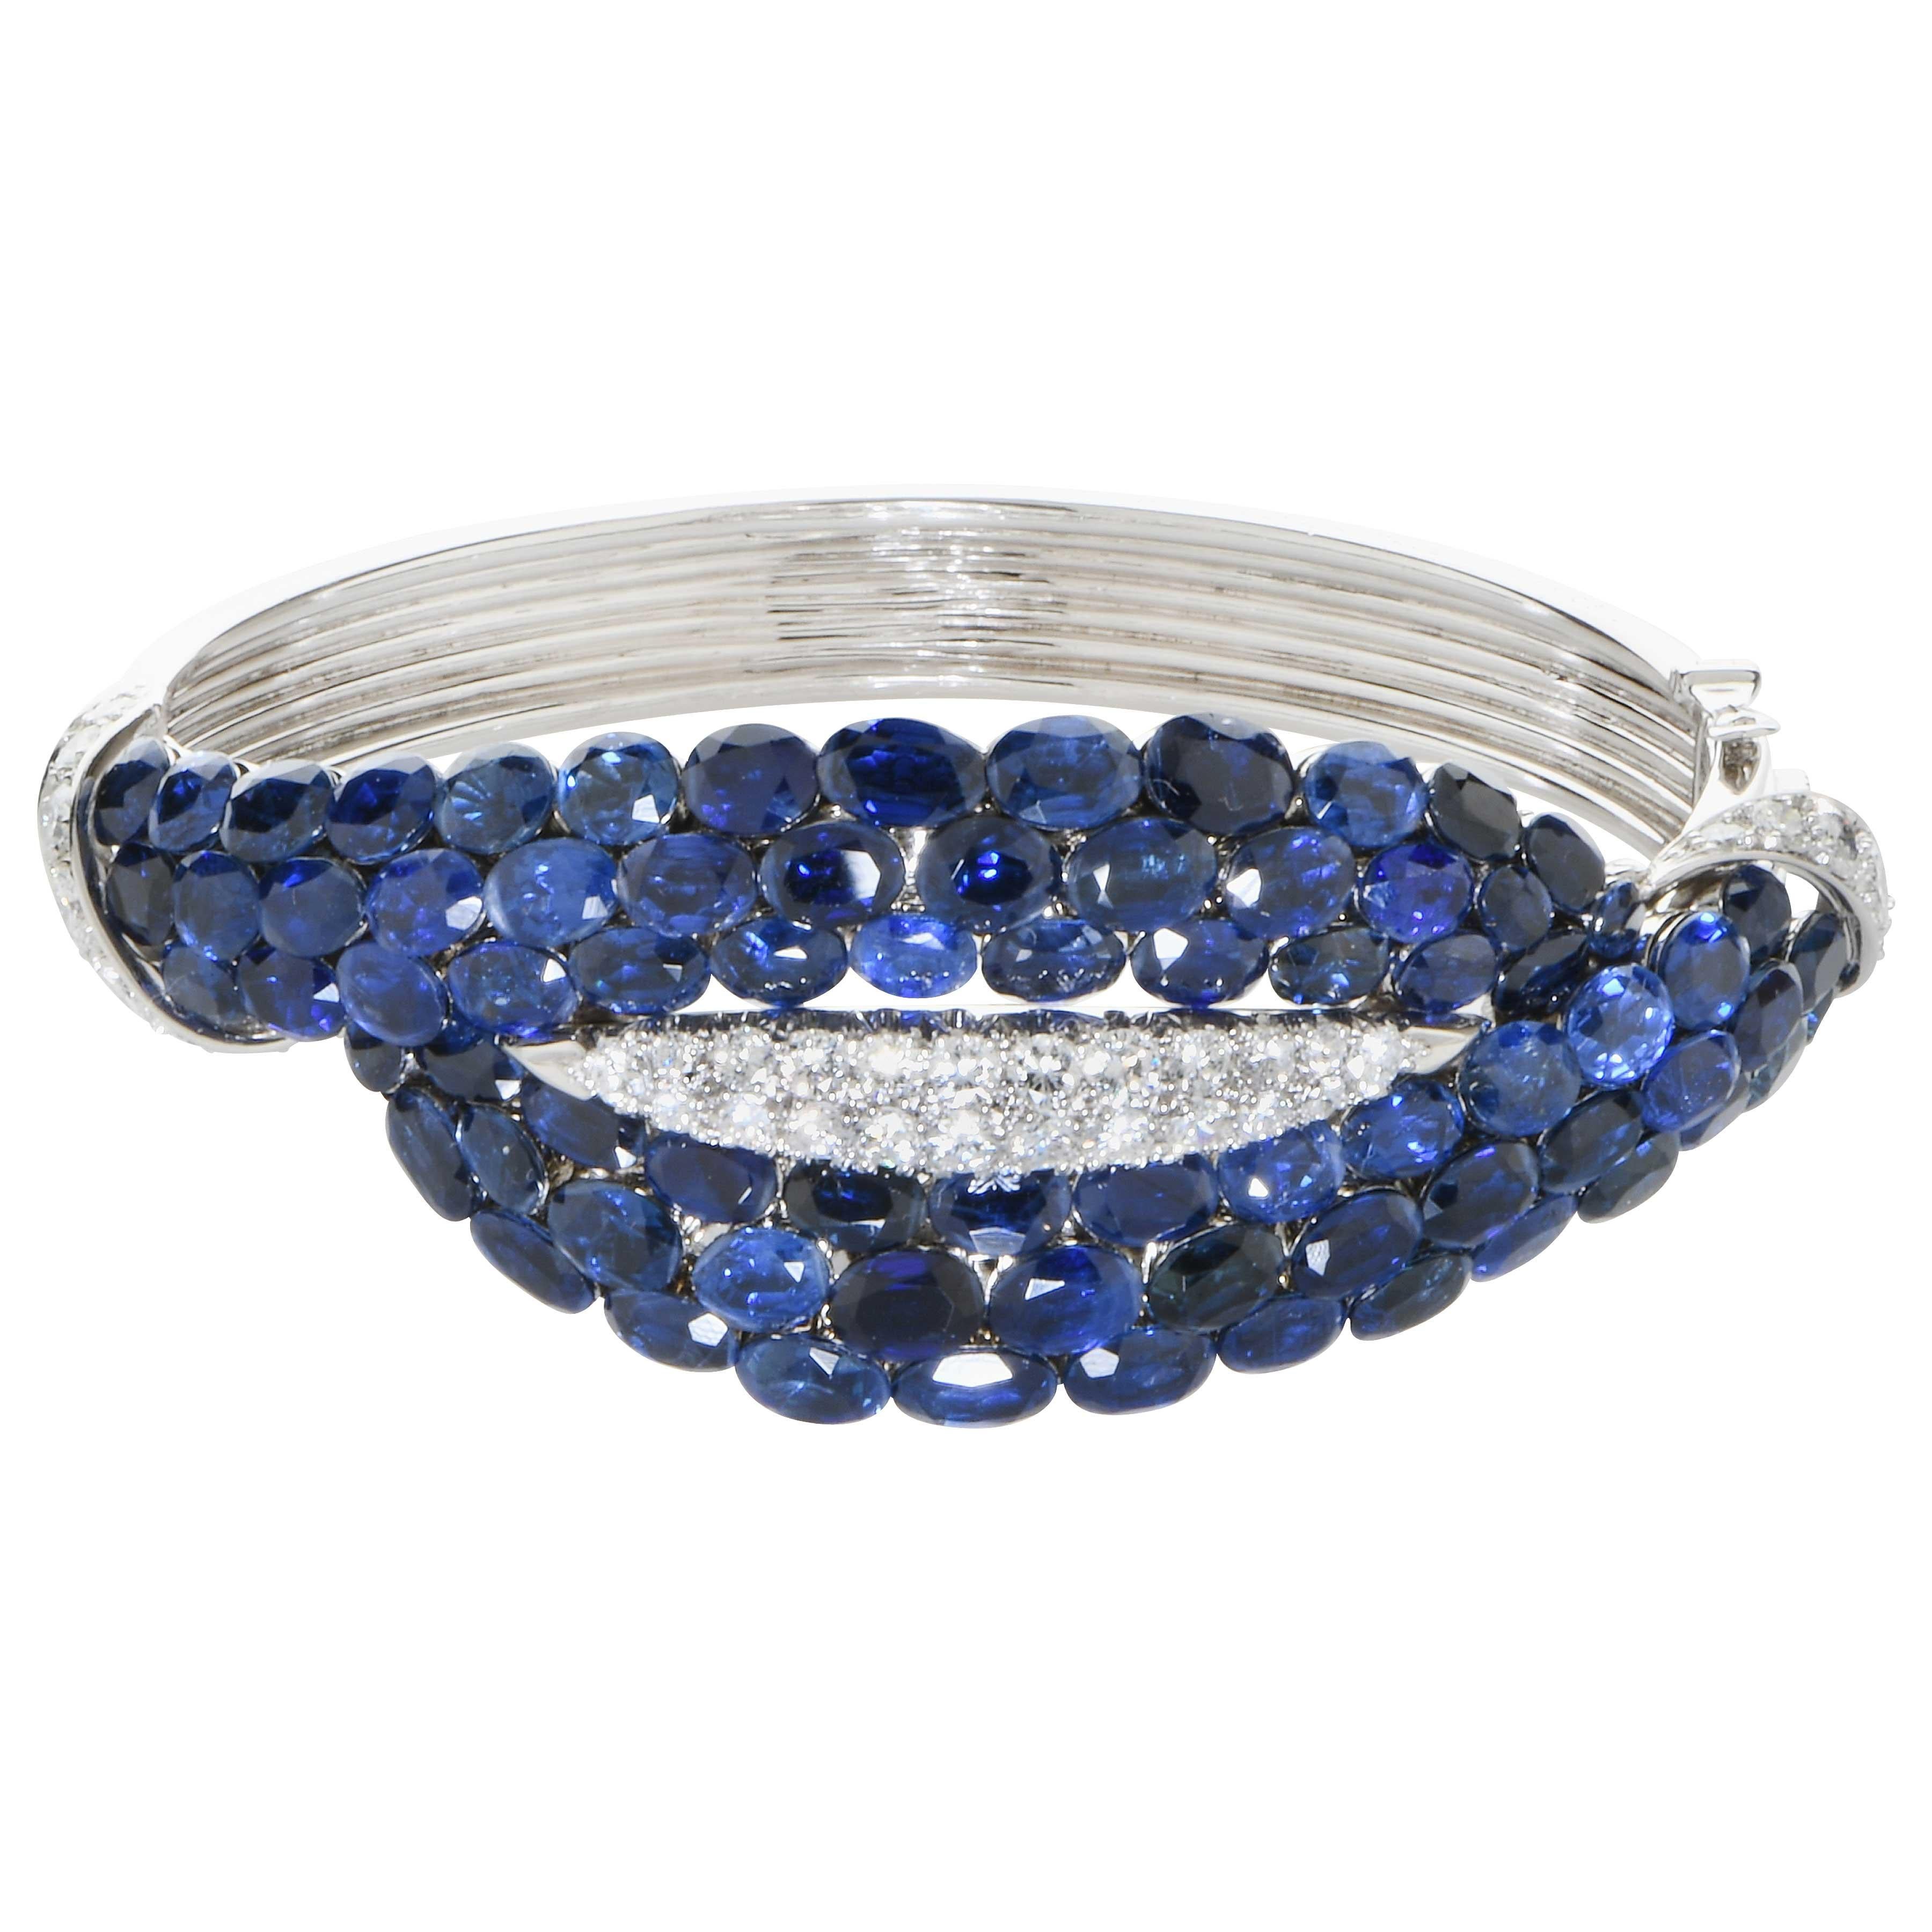 This Important and Rare Van Cleef & Arpels hand crafted beautiful bangle features 76 oval cut sapphires and 36 round brilliant cut diamonds hand set in Platinum and 18 Karat White Gold. Circa 1963.
This wonderful bracelet will become the signature